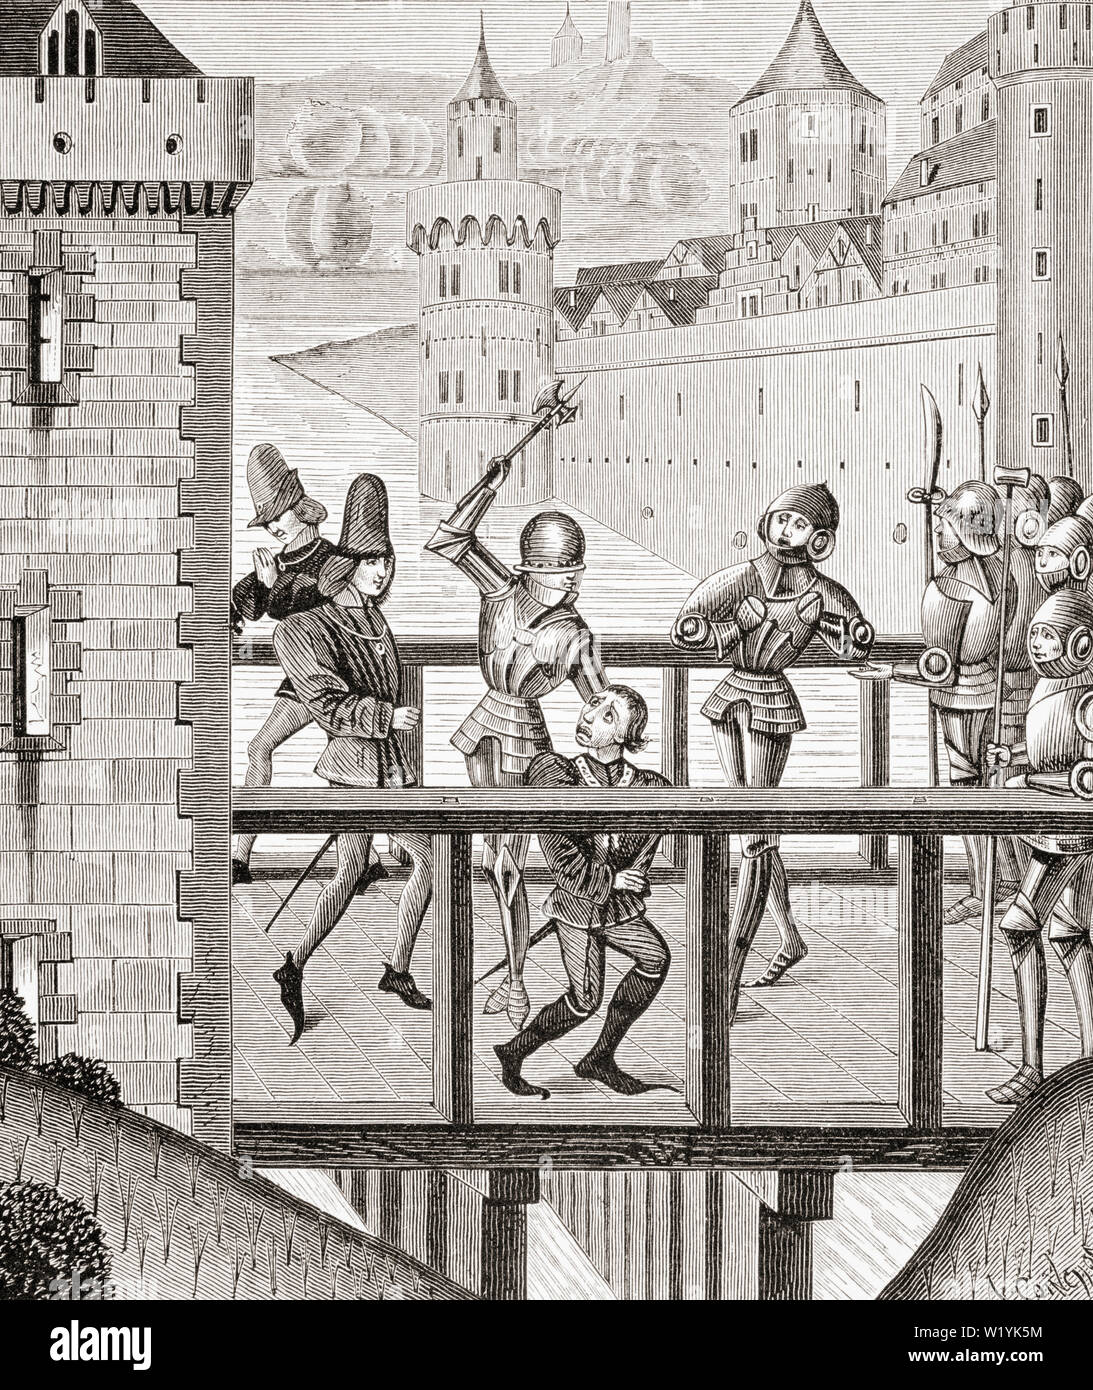 Assassination of the Duke of Burgundy, John the Fearless, 1371 - 1419,  on the Bridge of Montereau.  Copy of miniature in the 15th century Chronicles of Monstrelet Stock Photo